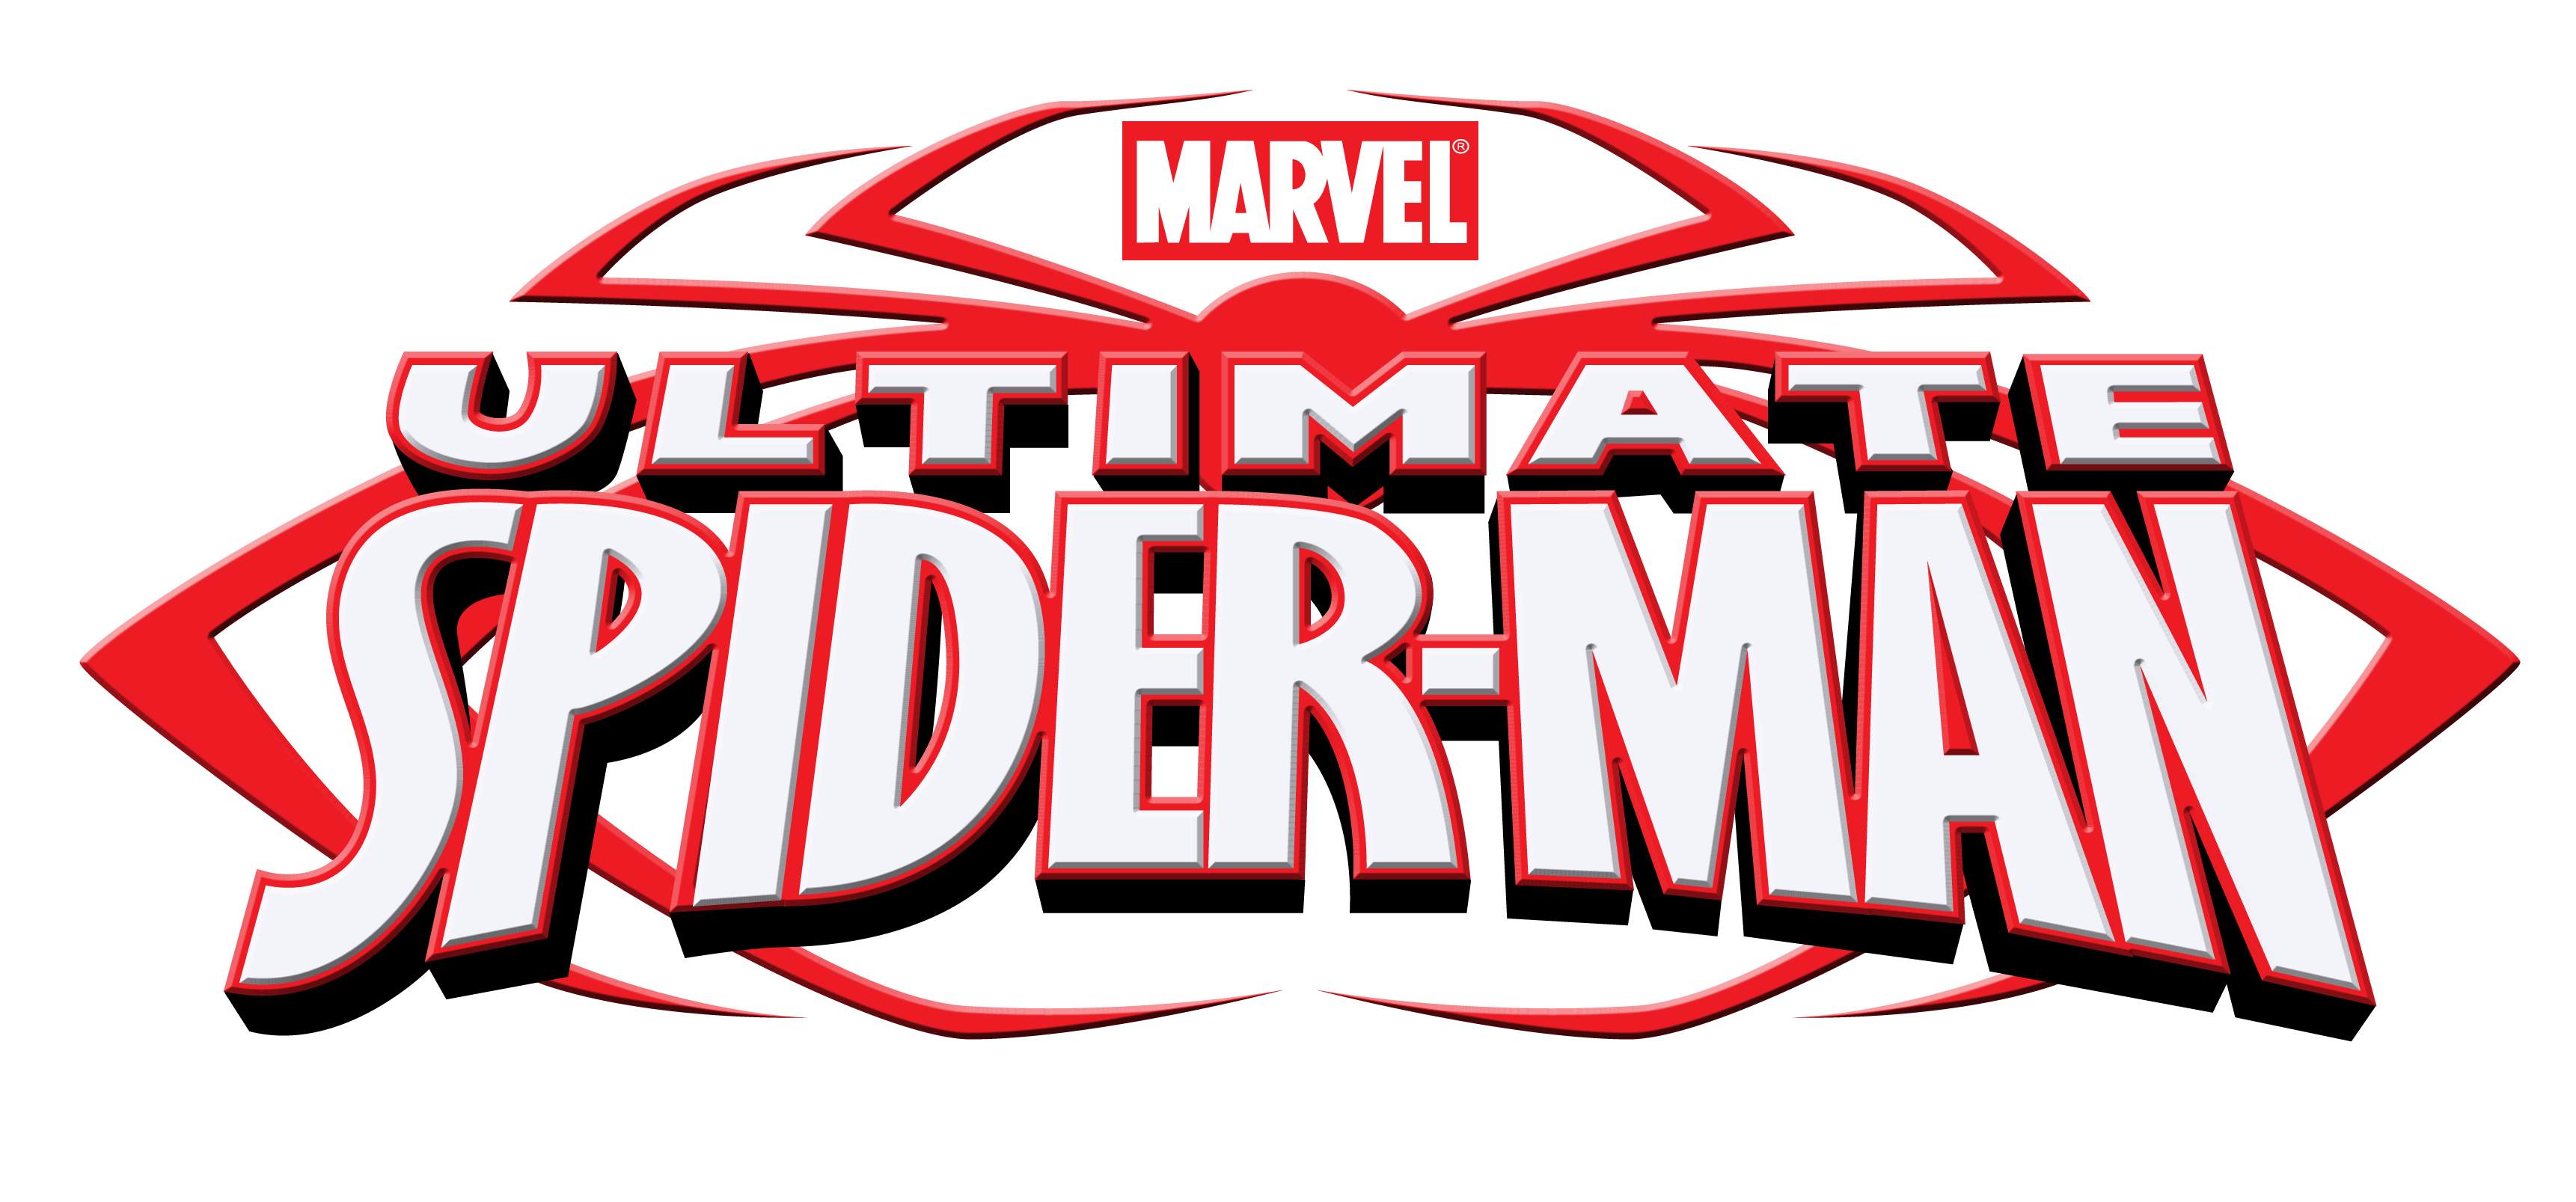 New Images Released For The ULTIMATE SPIDER-MAN Halloween Crossover Special